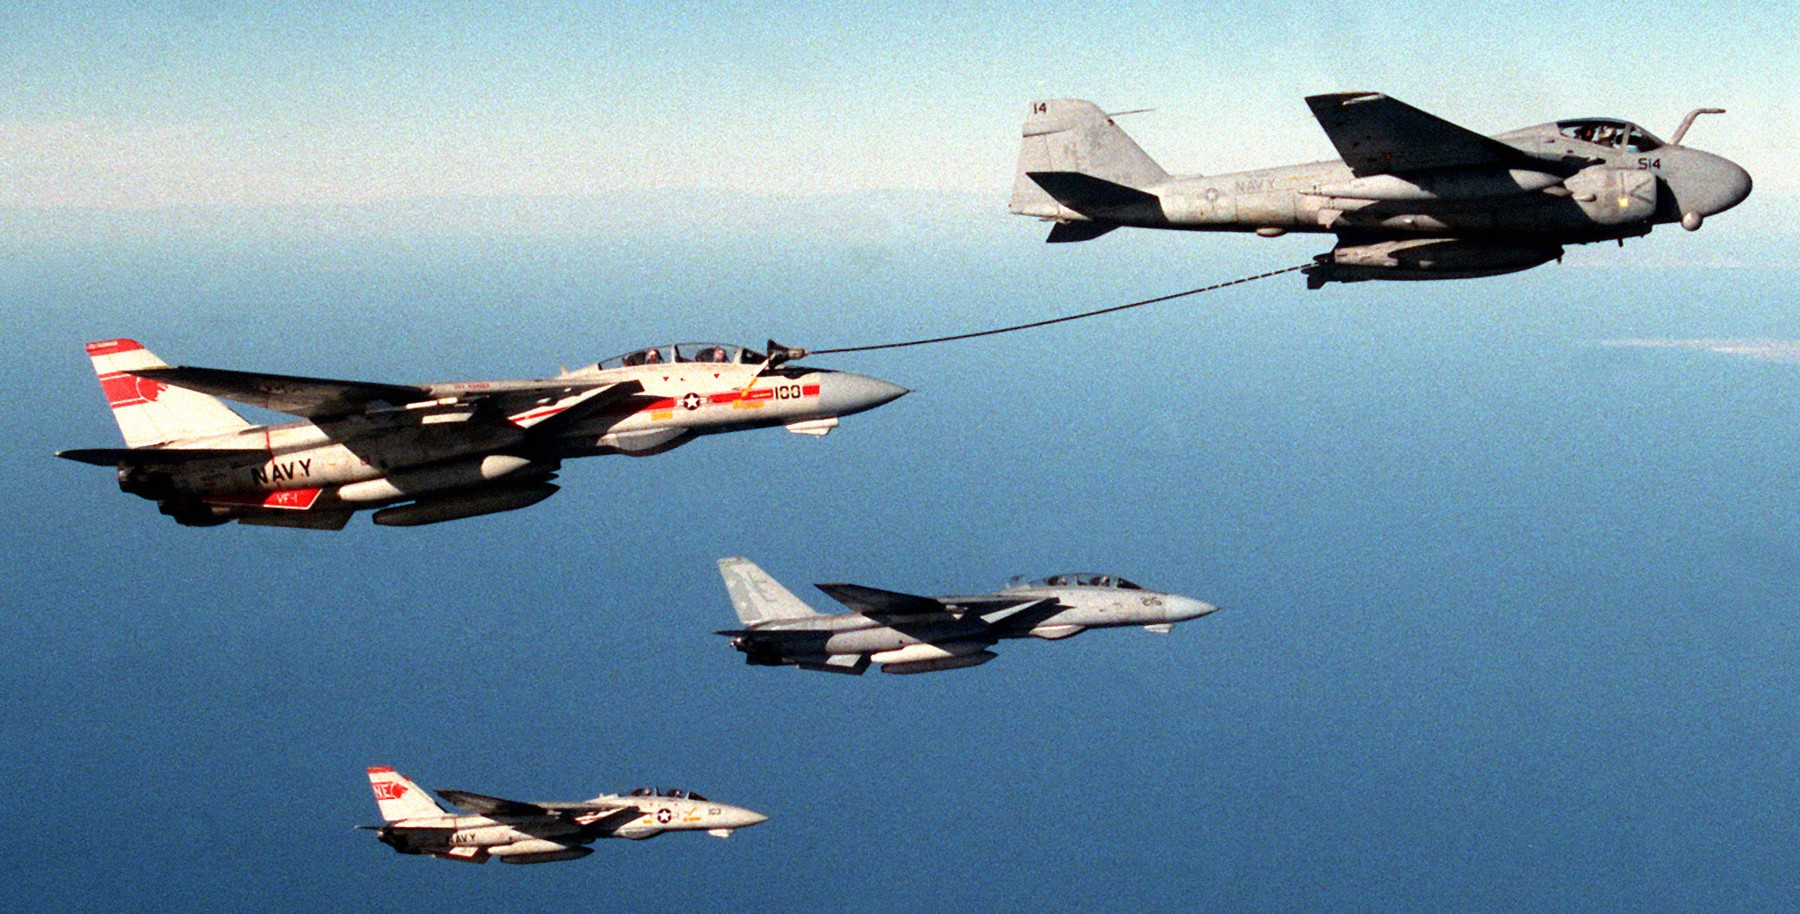 vf-1 wolfpack fighter squadron f-14a tomcat carrier air wing cvw-2 uss ranger cv-61 06 refueling